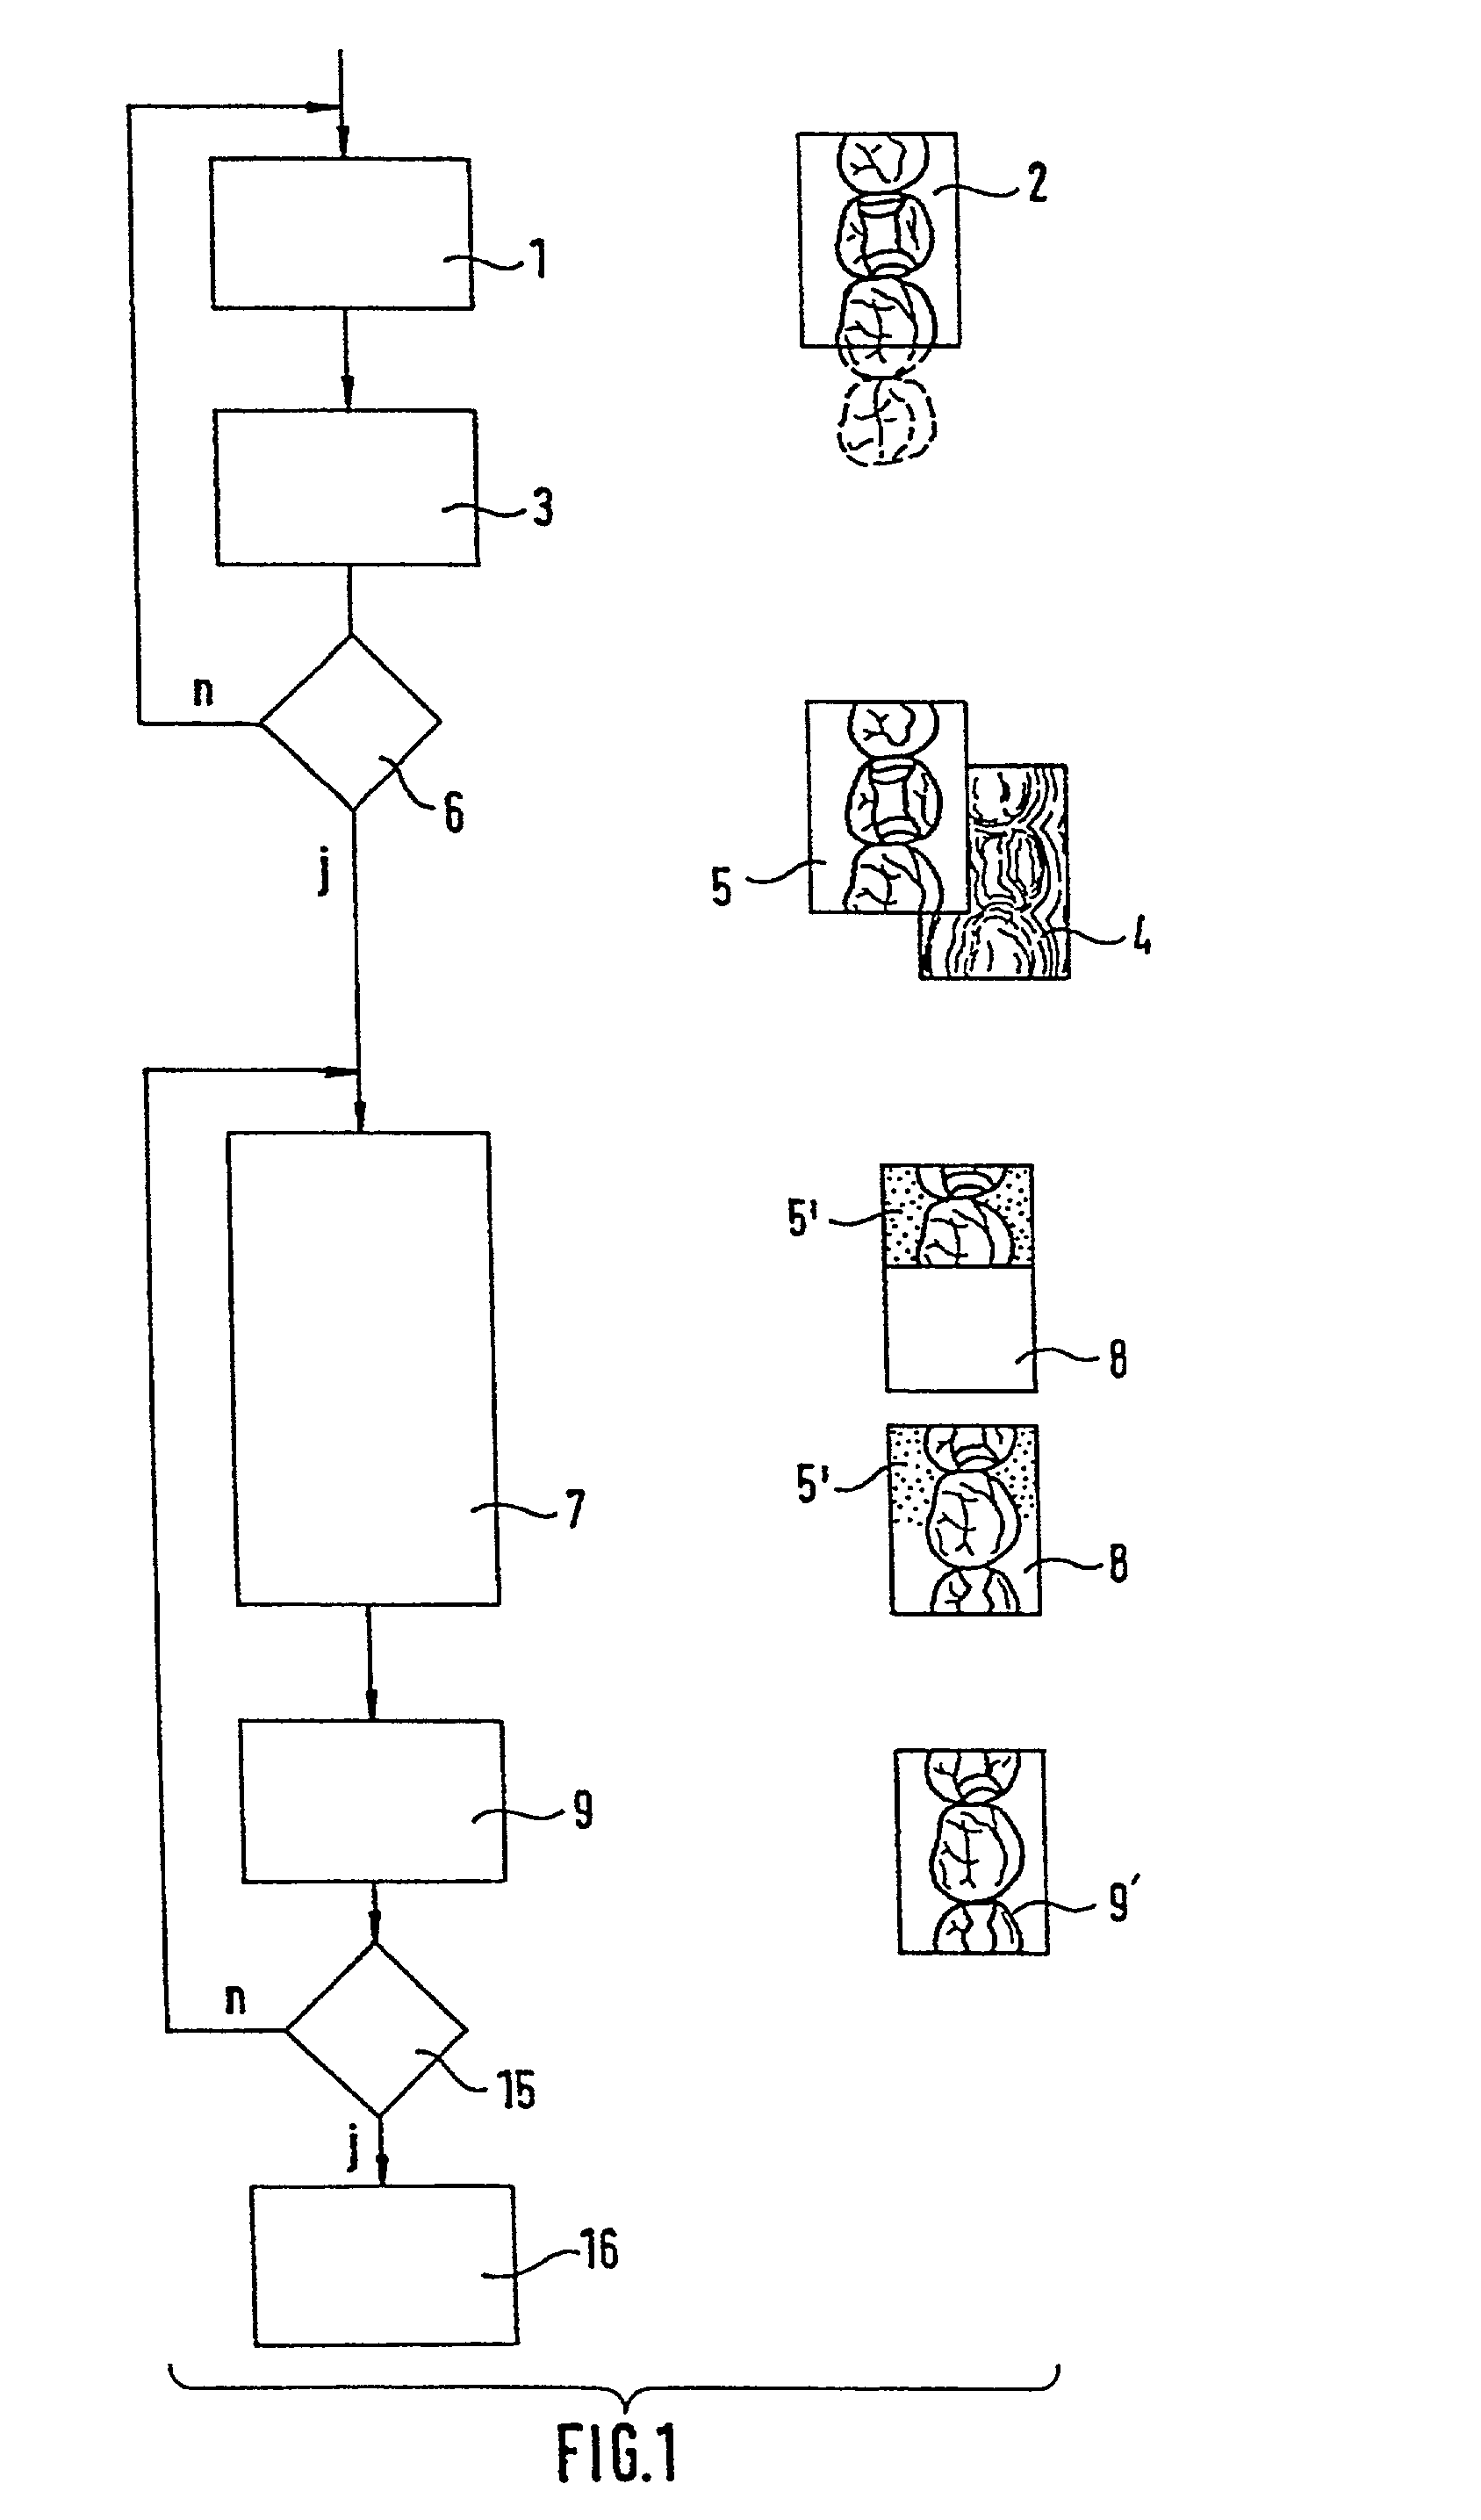 Method for detecting and representing one or more objects, for example teeth